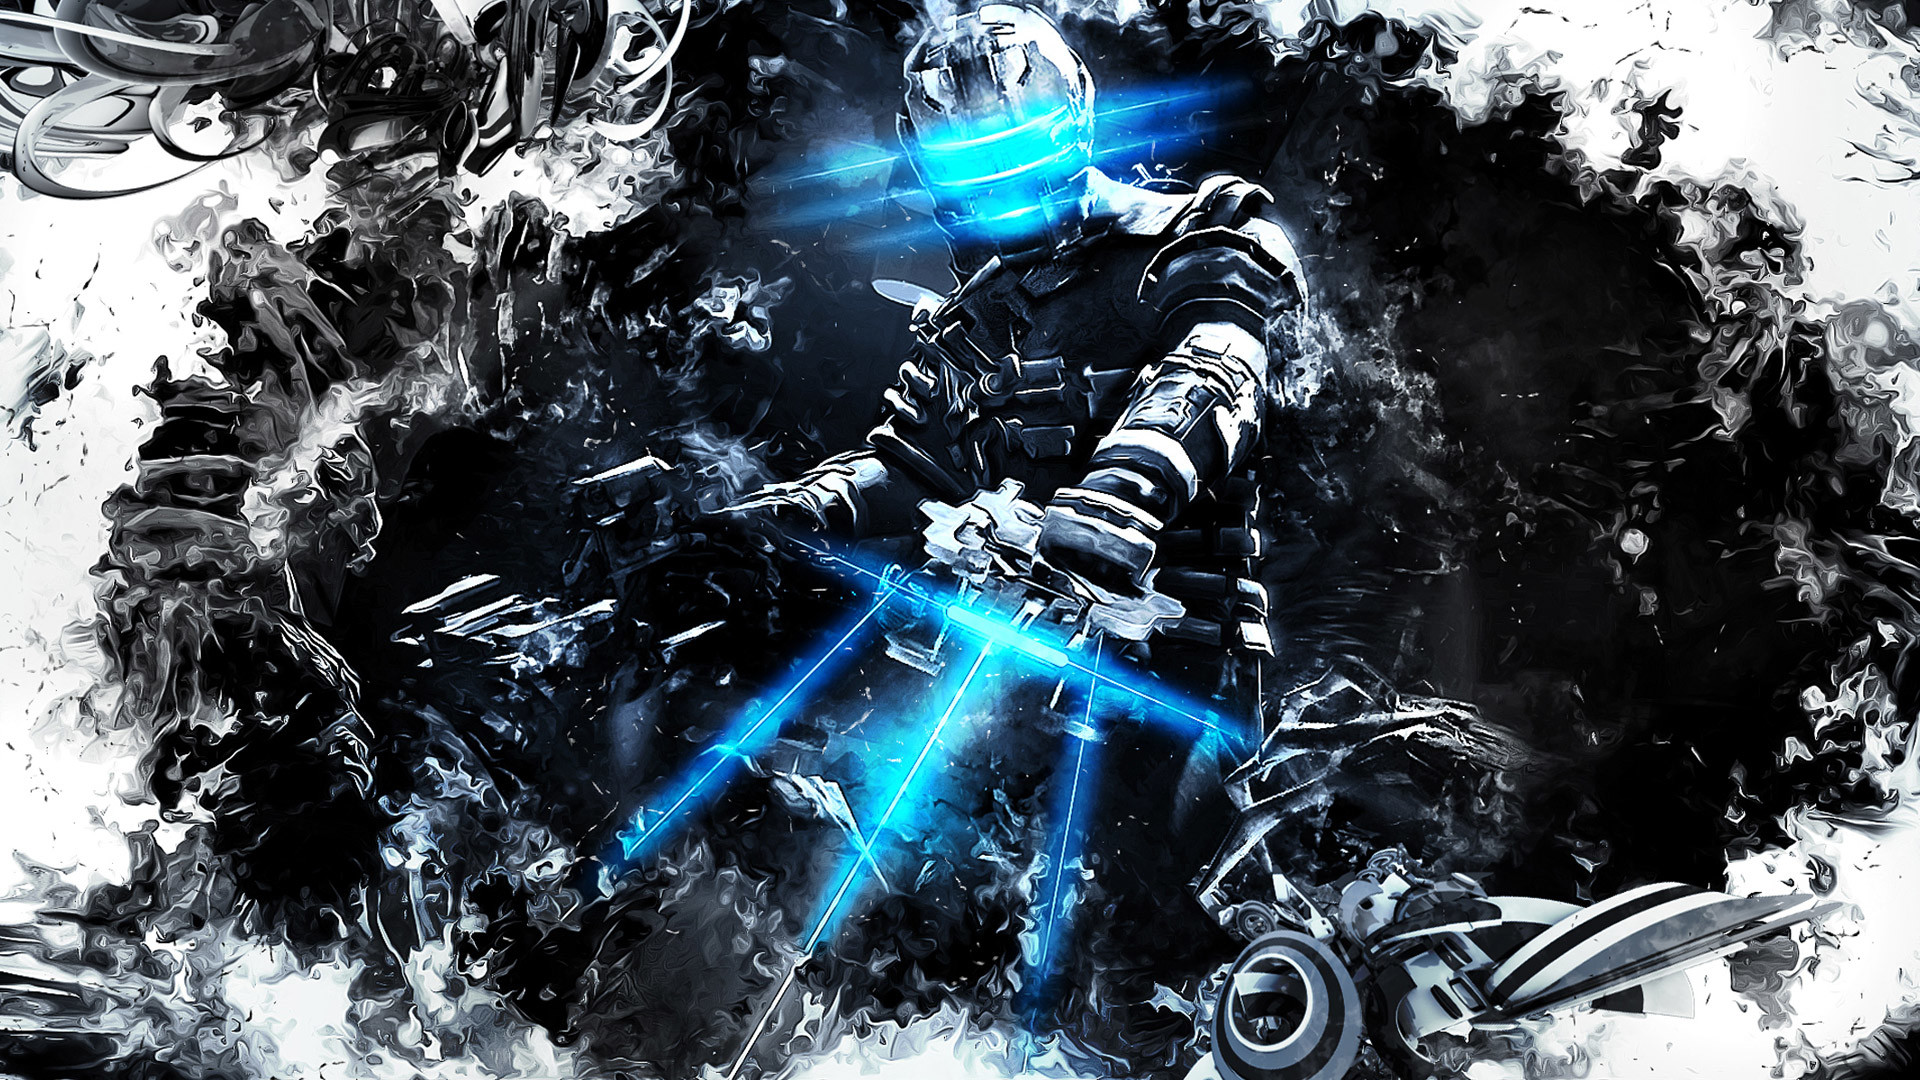 1920x1080 Awesome Dead Space 3 Wallpaper 29460